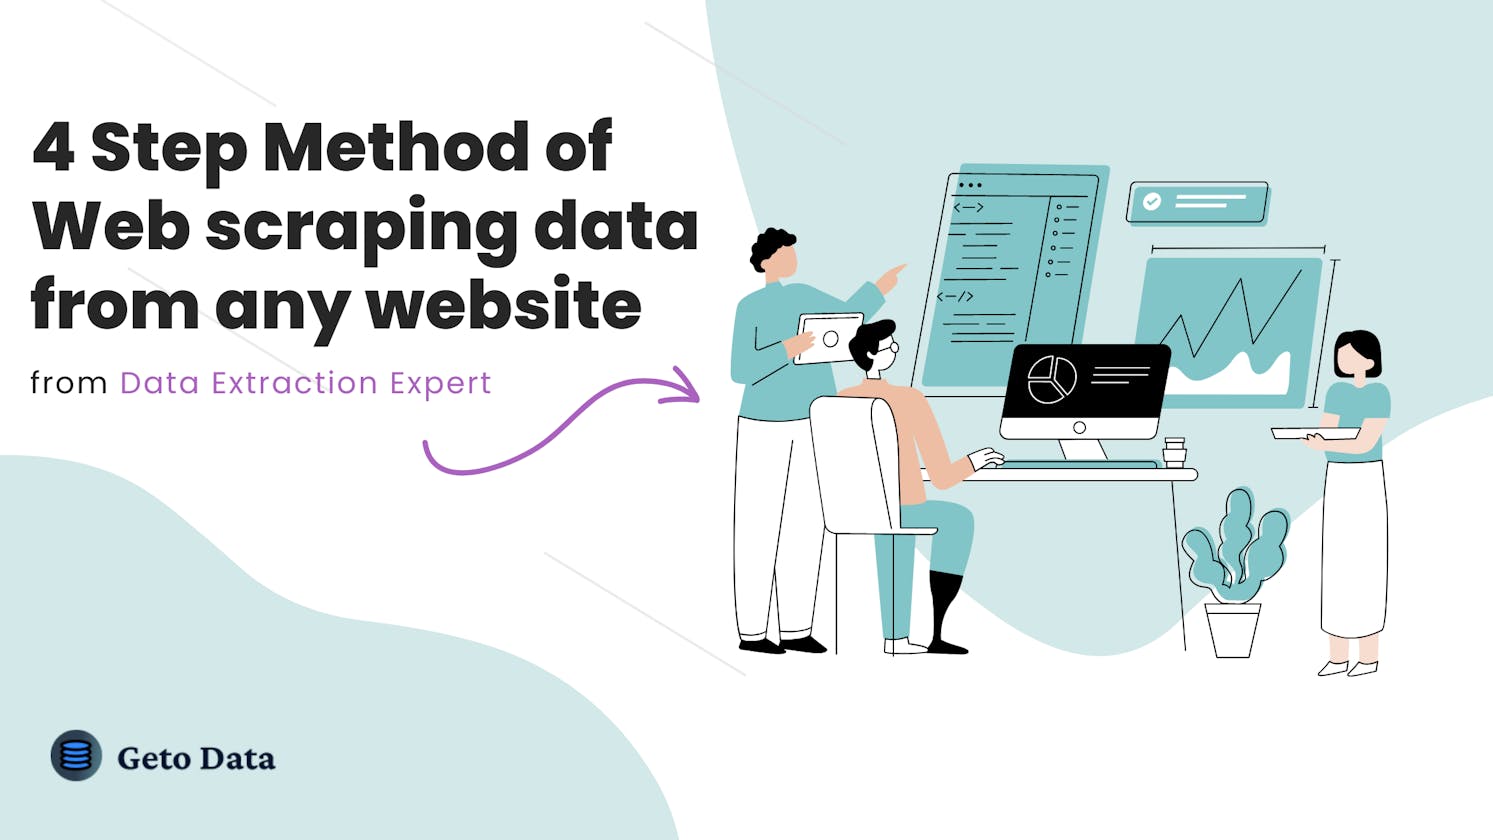 4 Step Method of Web scraping data from any website (From Data Extraction Expert)